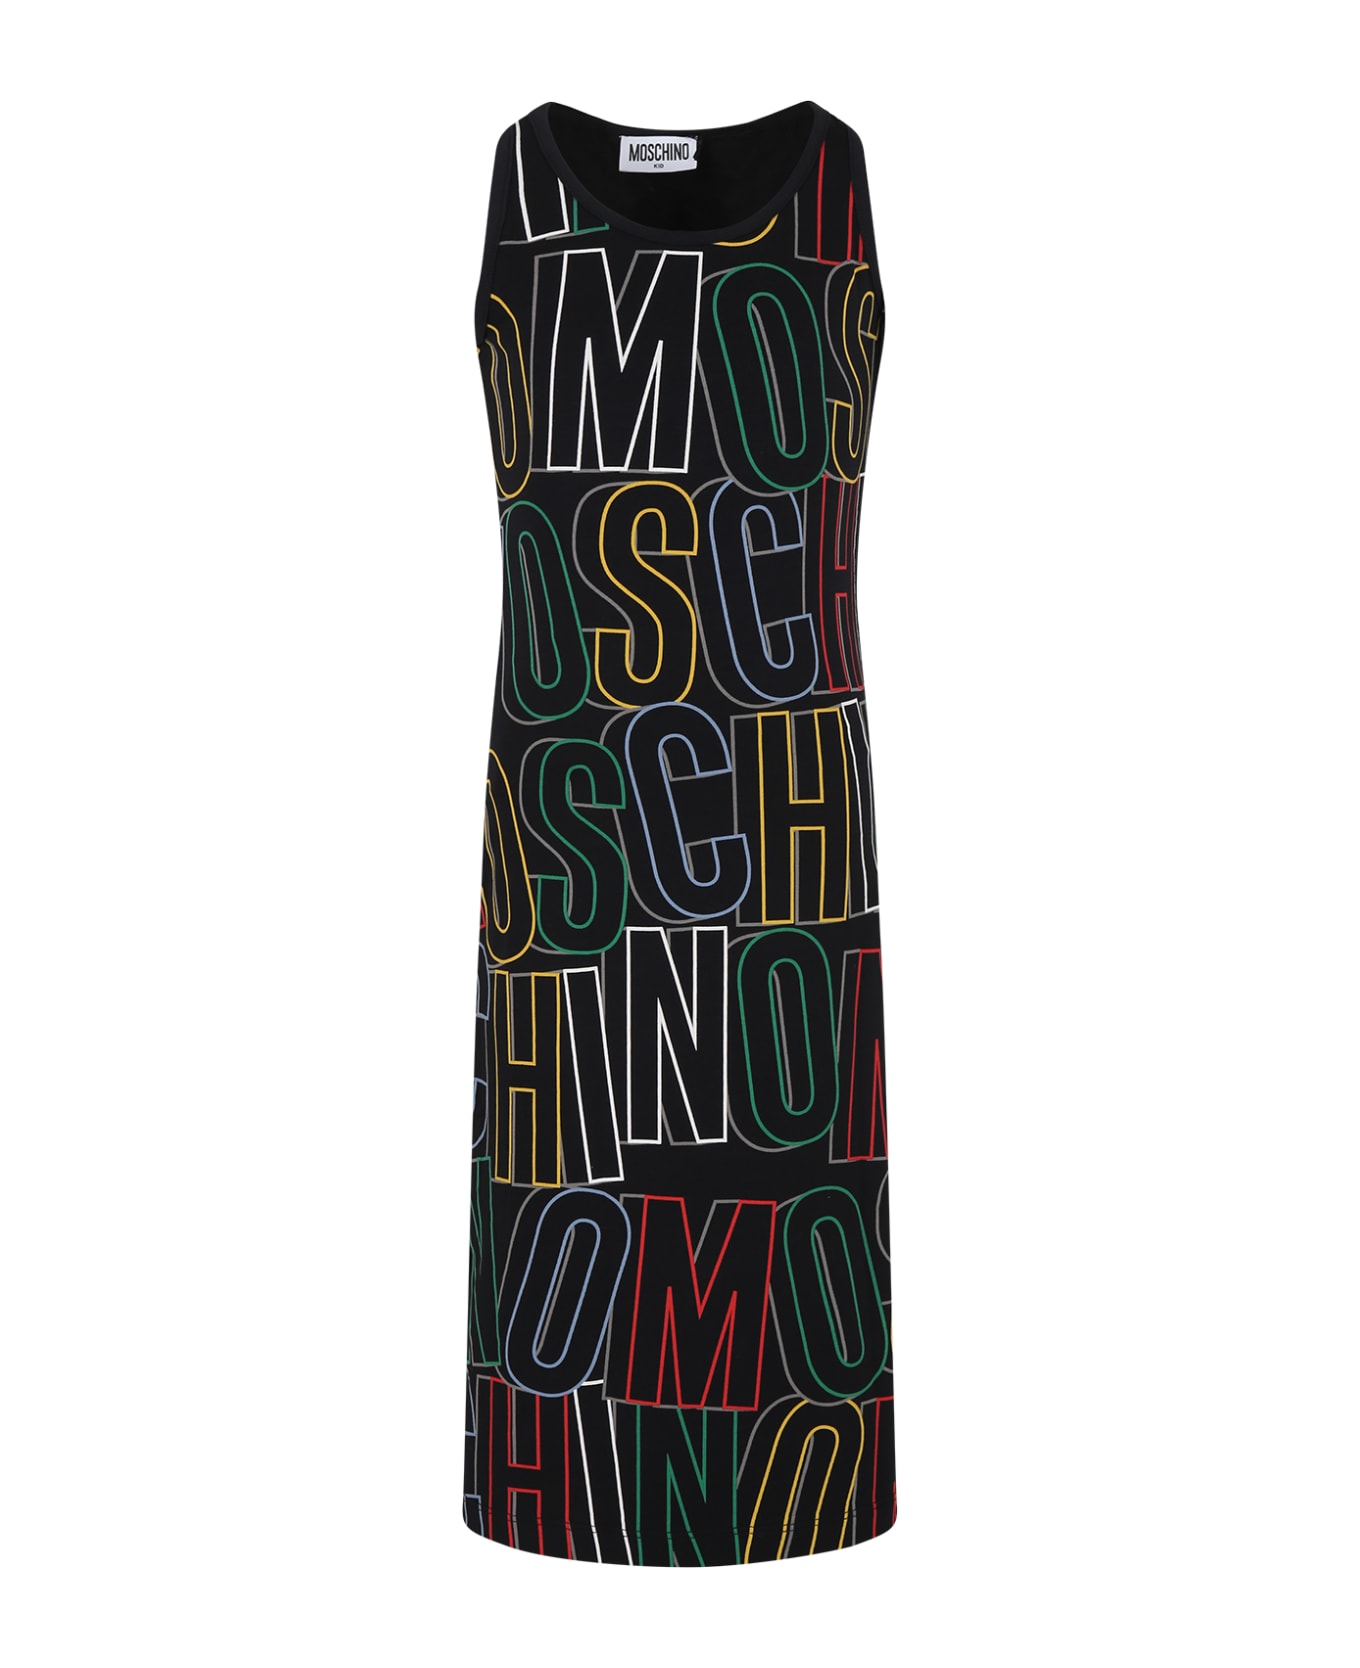 Moschino Black Dress For Girl With Logo - Black